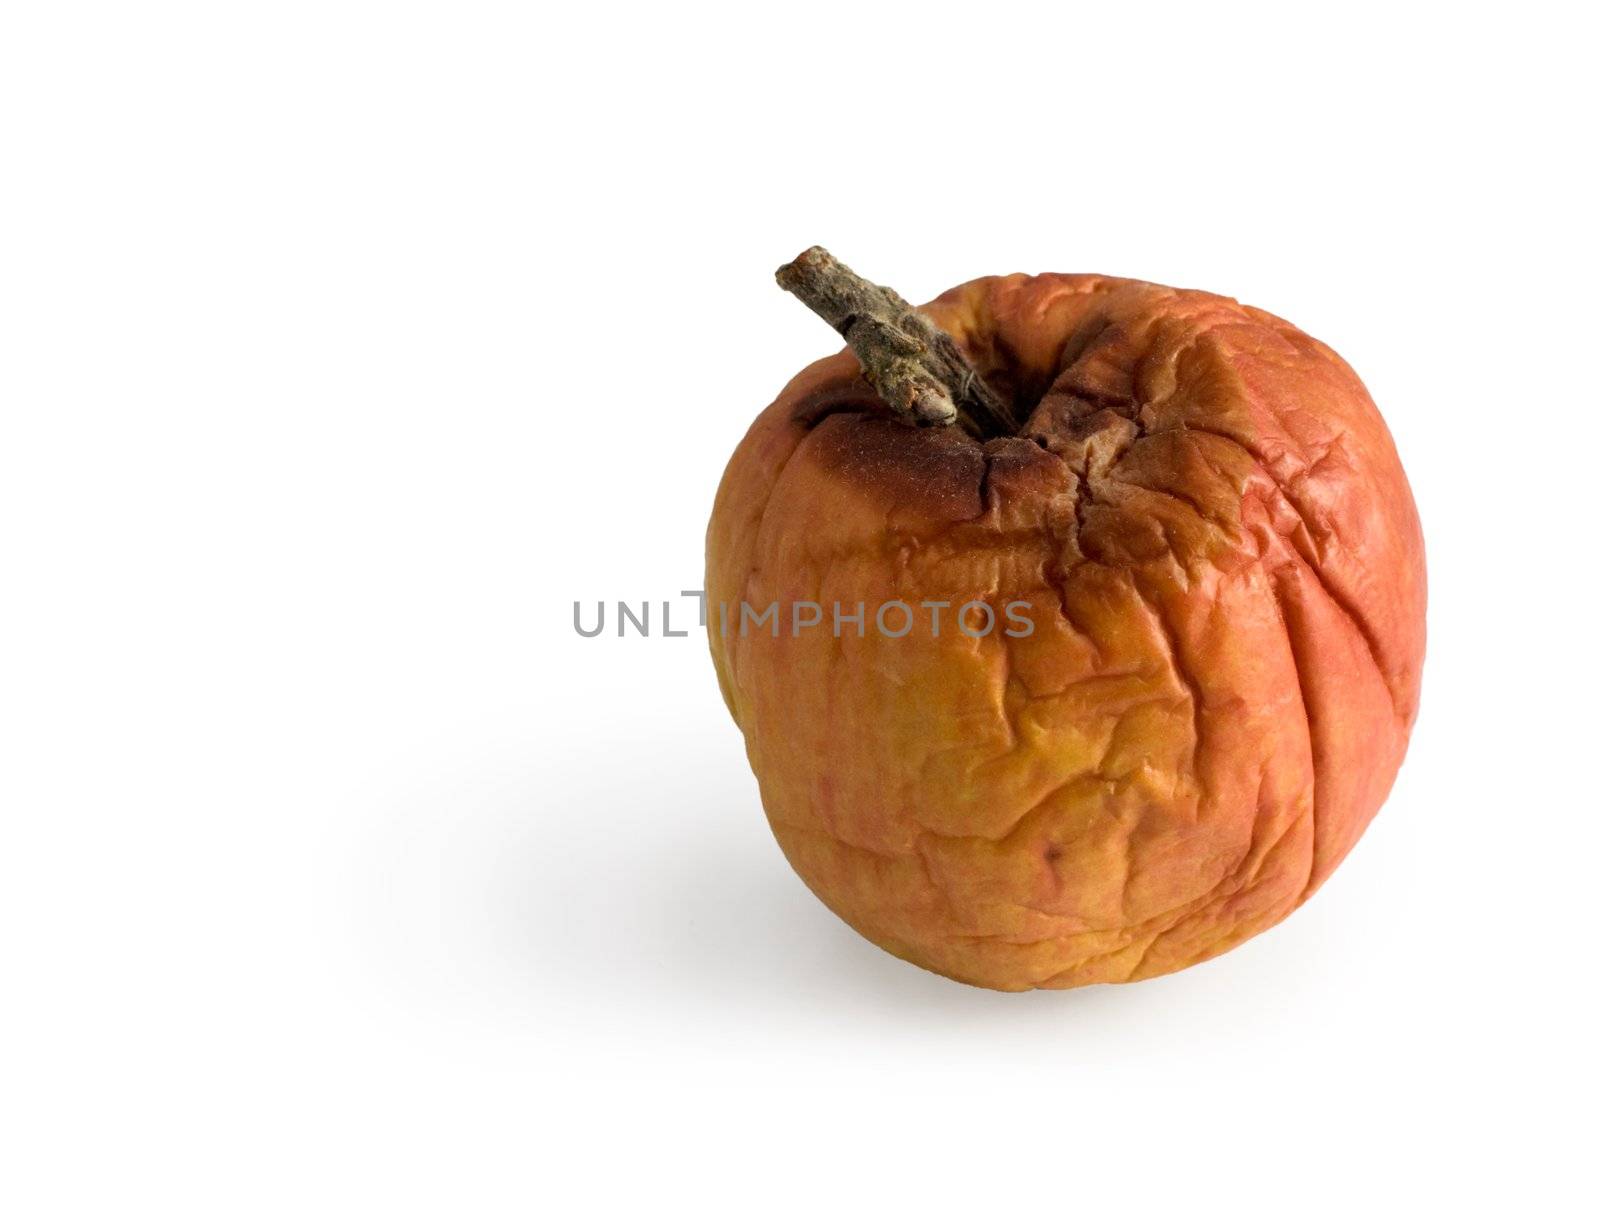 Rotten disgusting apple on a white background